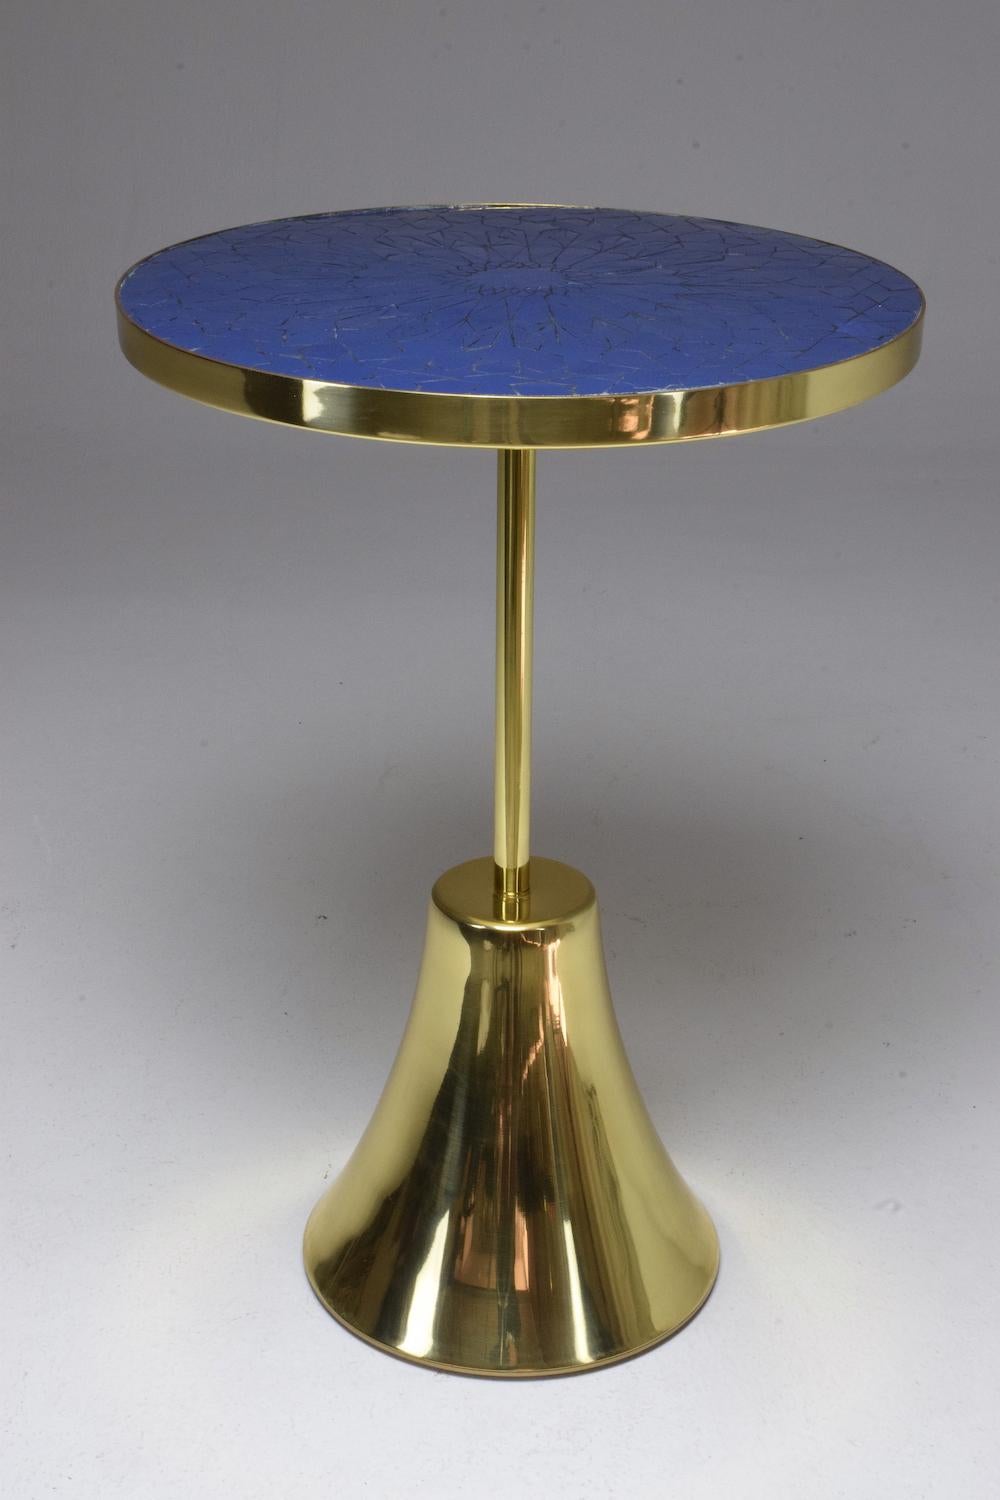 Contemporary handcrafted guéridon side table composed of a solid brass structure and designed with an intricate blue mosaic tile tabletop with an oriental zellige design. 
A choice of various heights and dimensions allows for various nesting layout